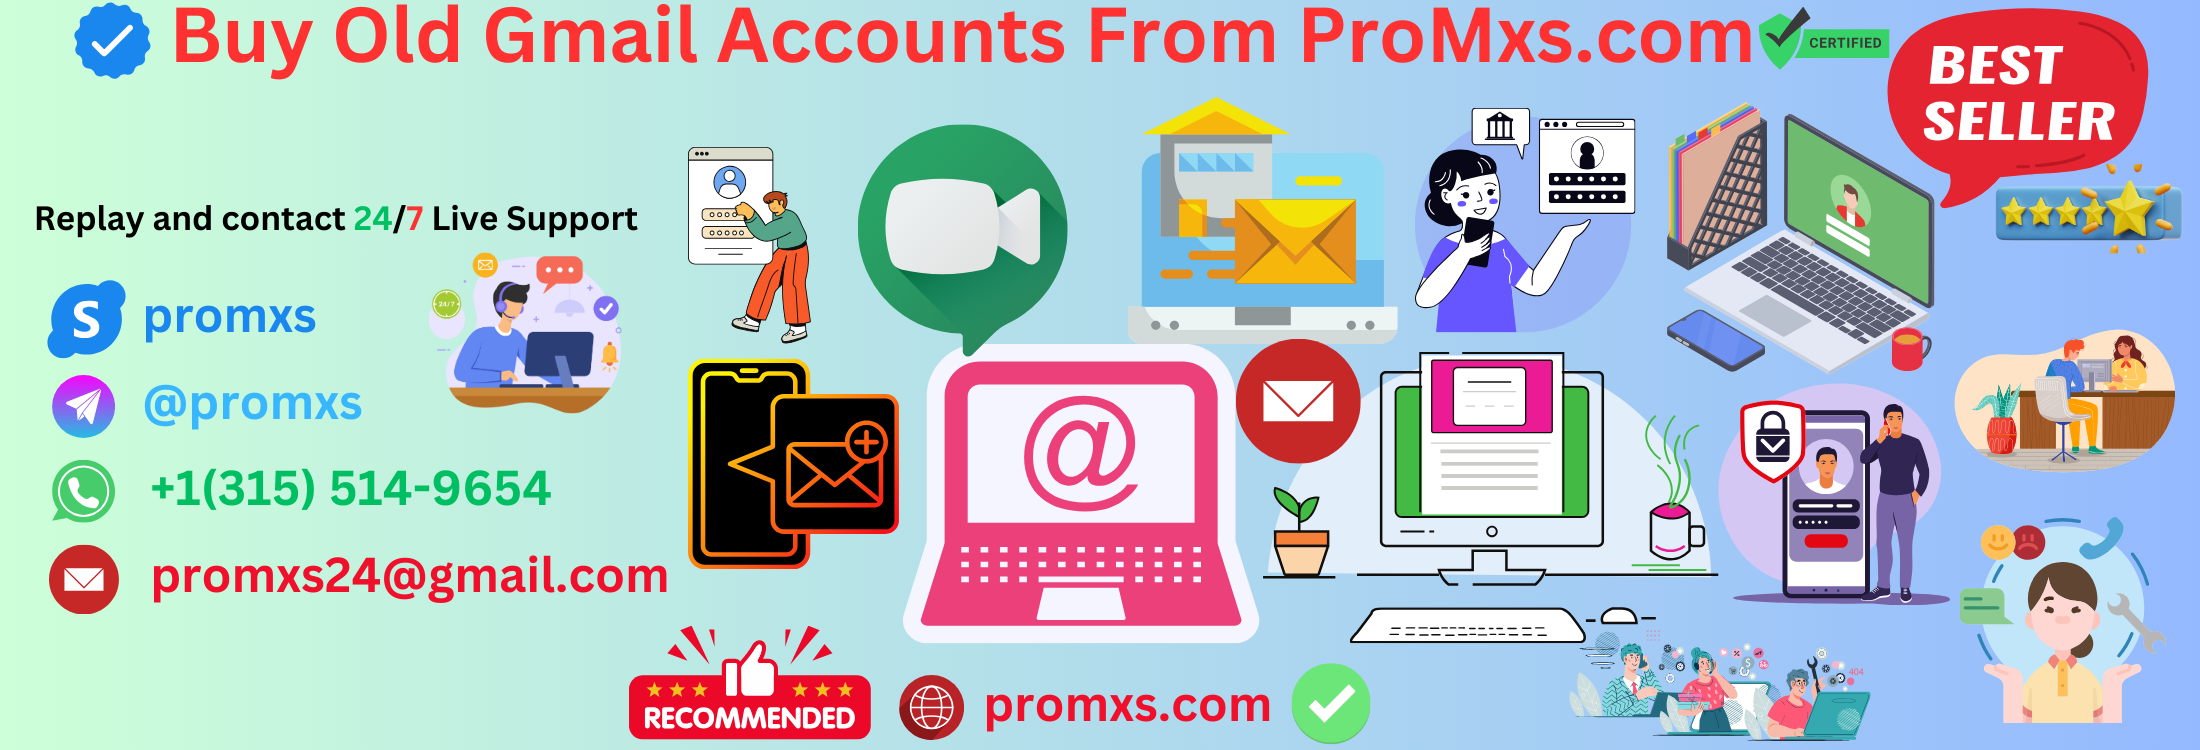 Buy Old Gmail accounts